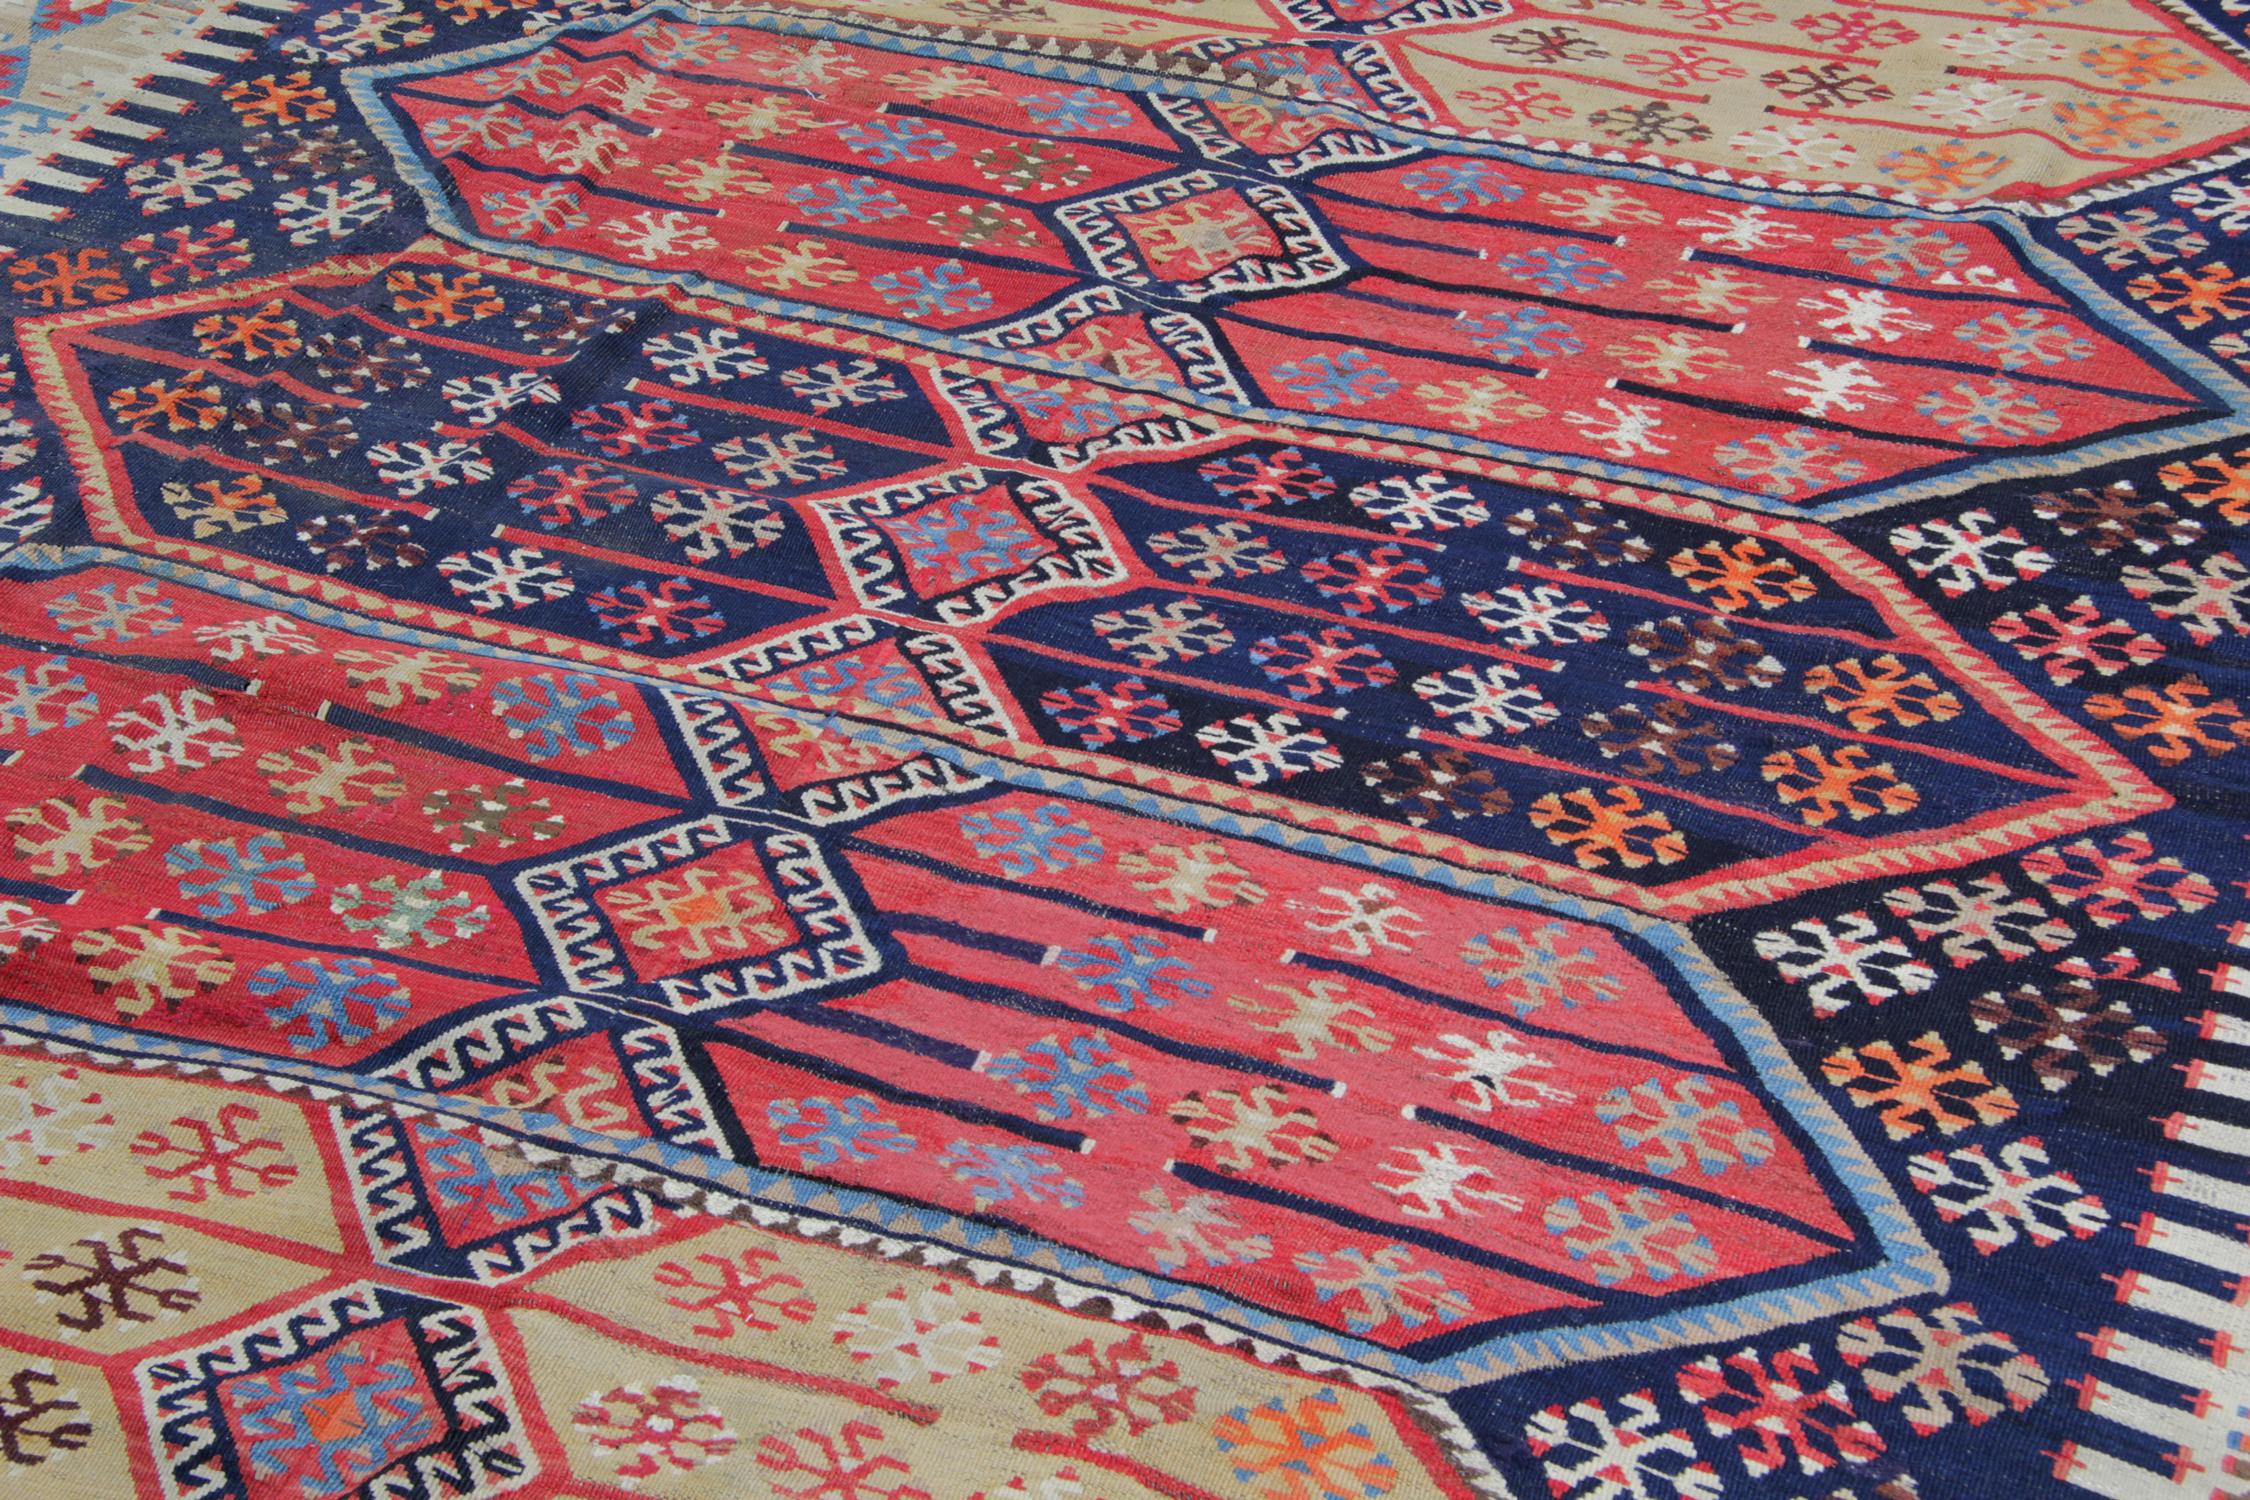 Turkish Rugs, Antique Rugs Kilims from Konya, Handmade Carpet Kilim Rug In Excellent Condition For Sale In Hampshire, GB